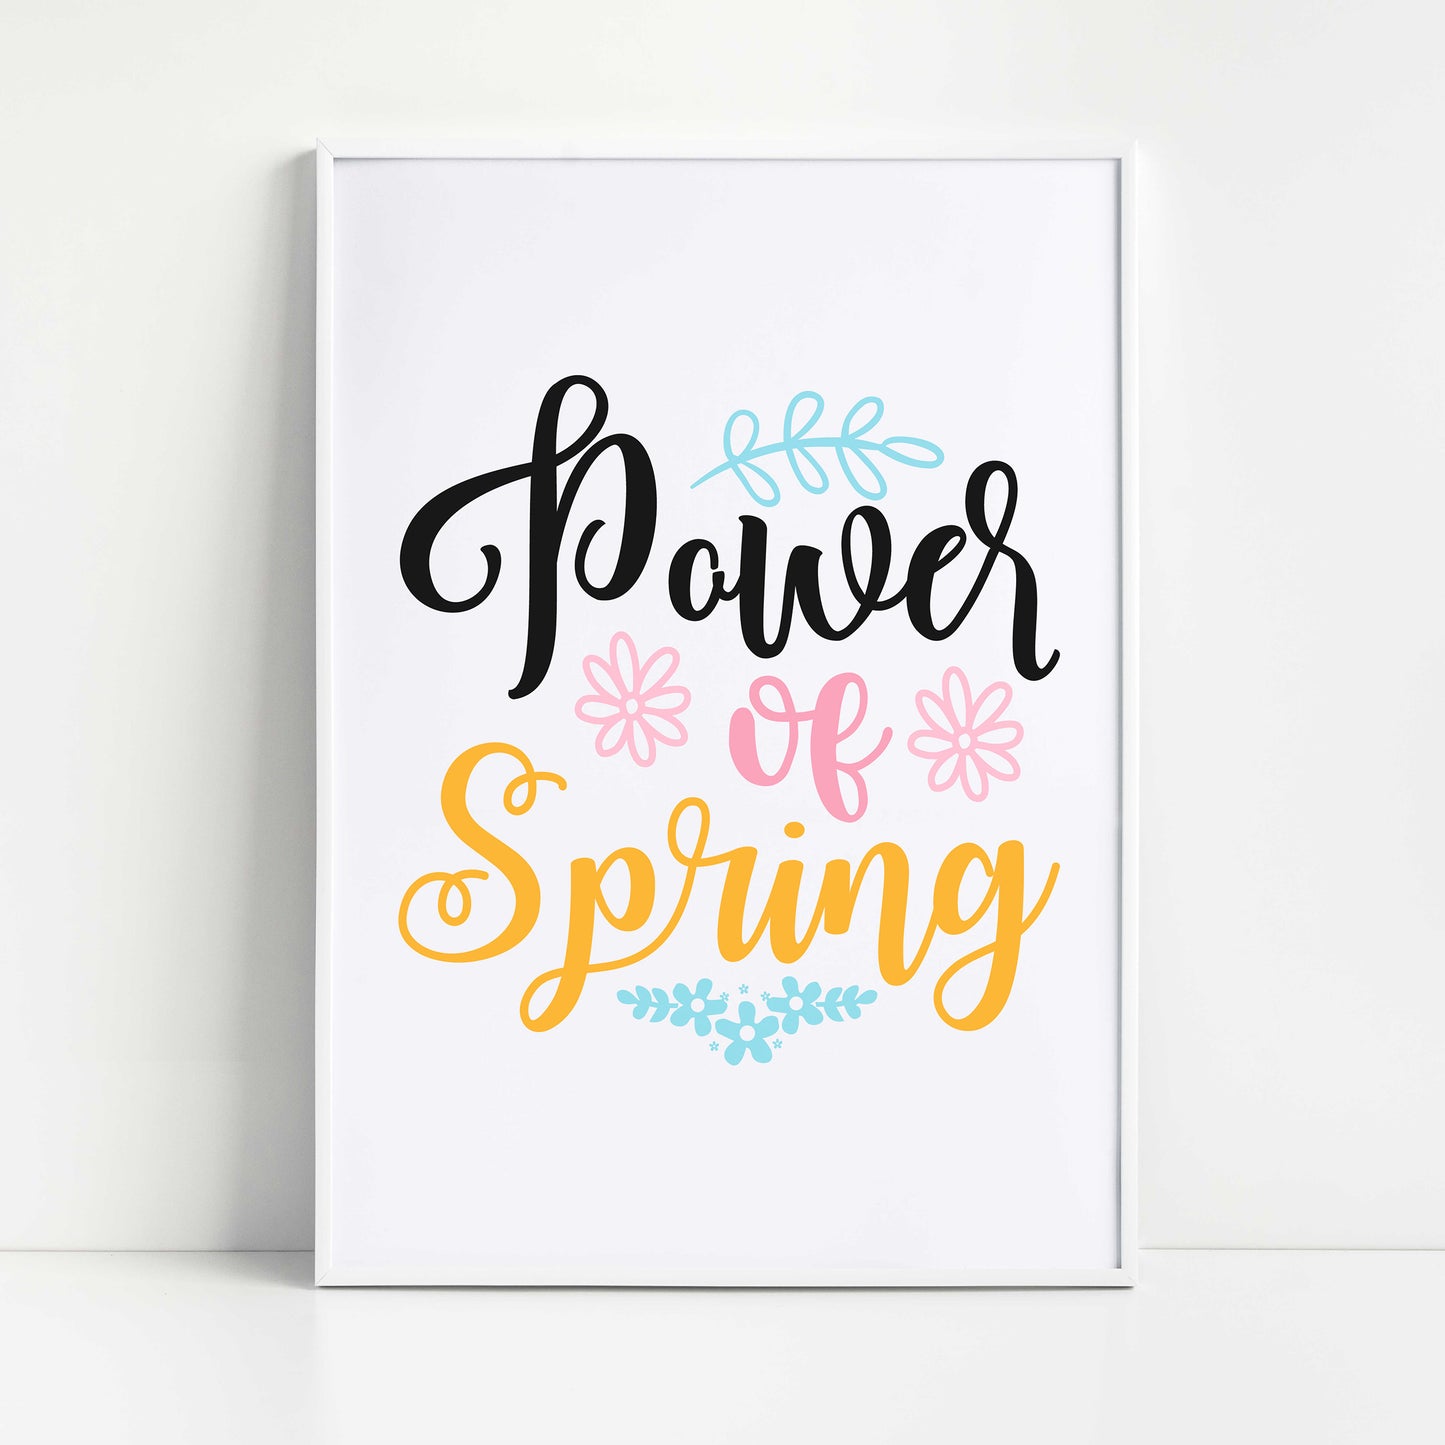 "Power Of Spring" Graphic